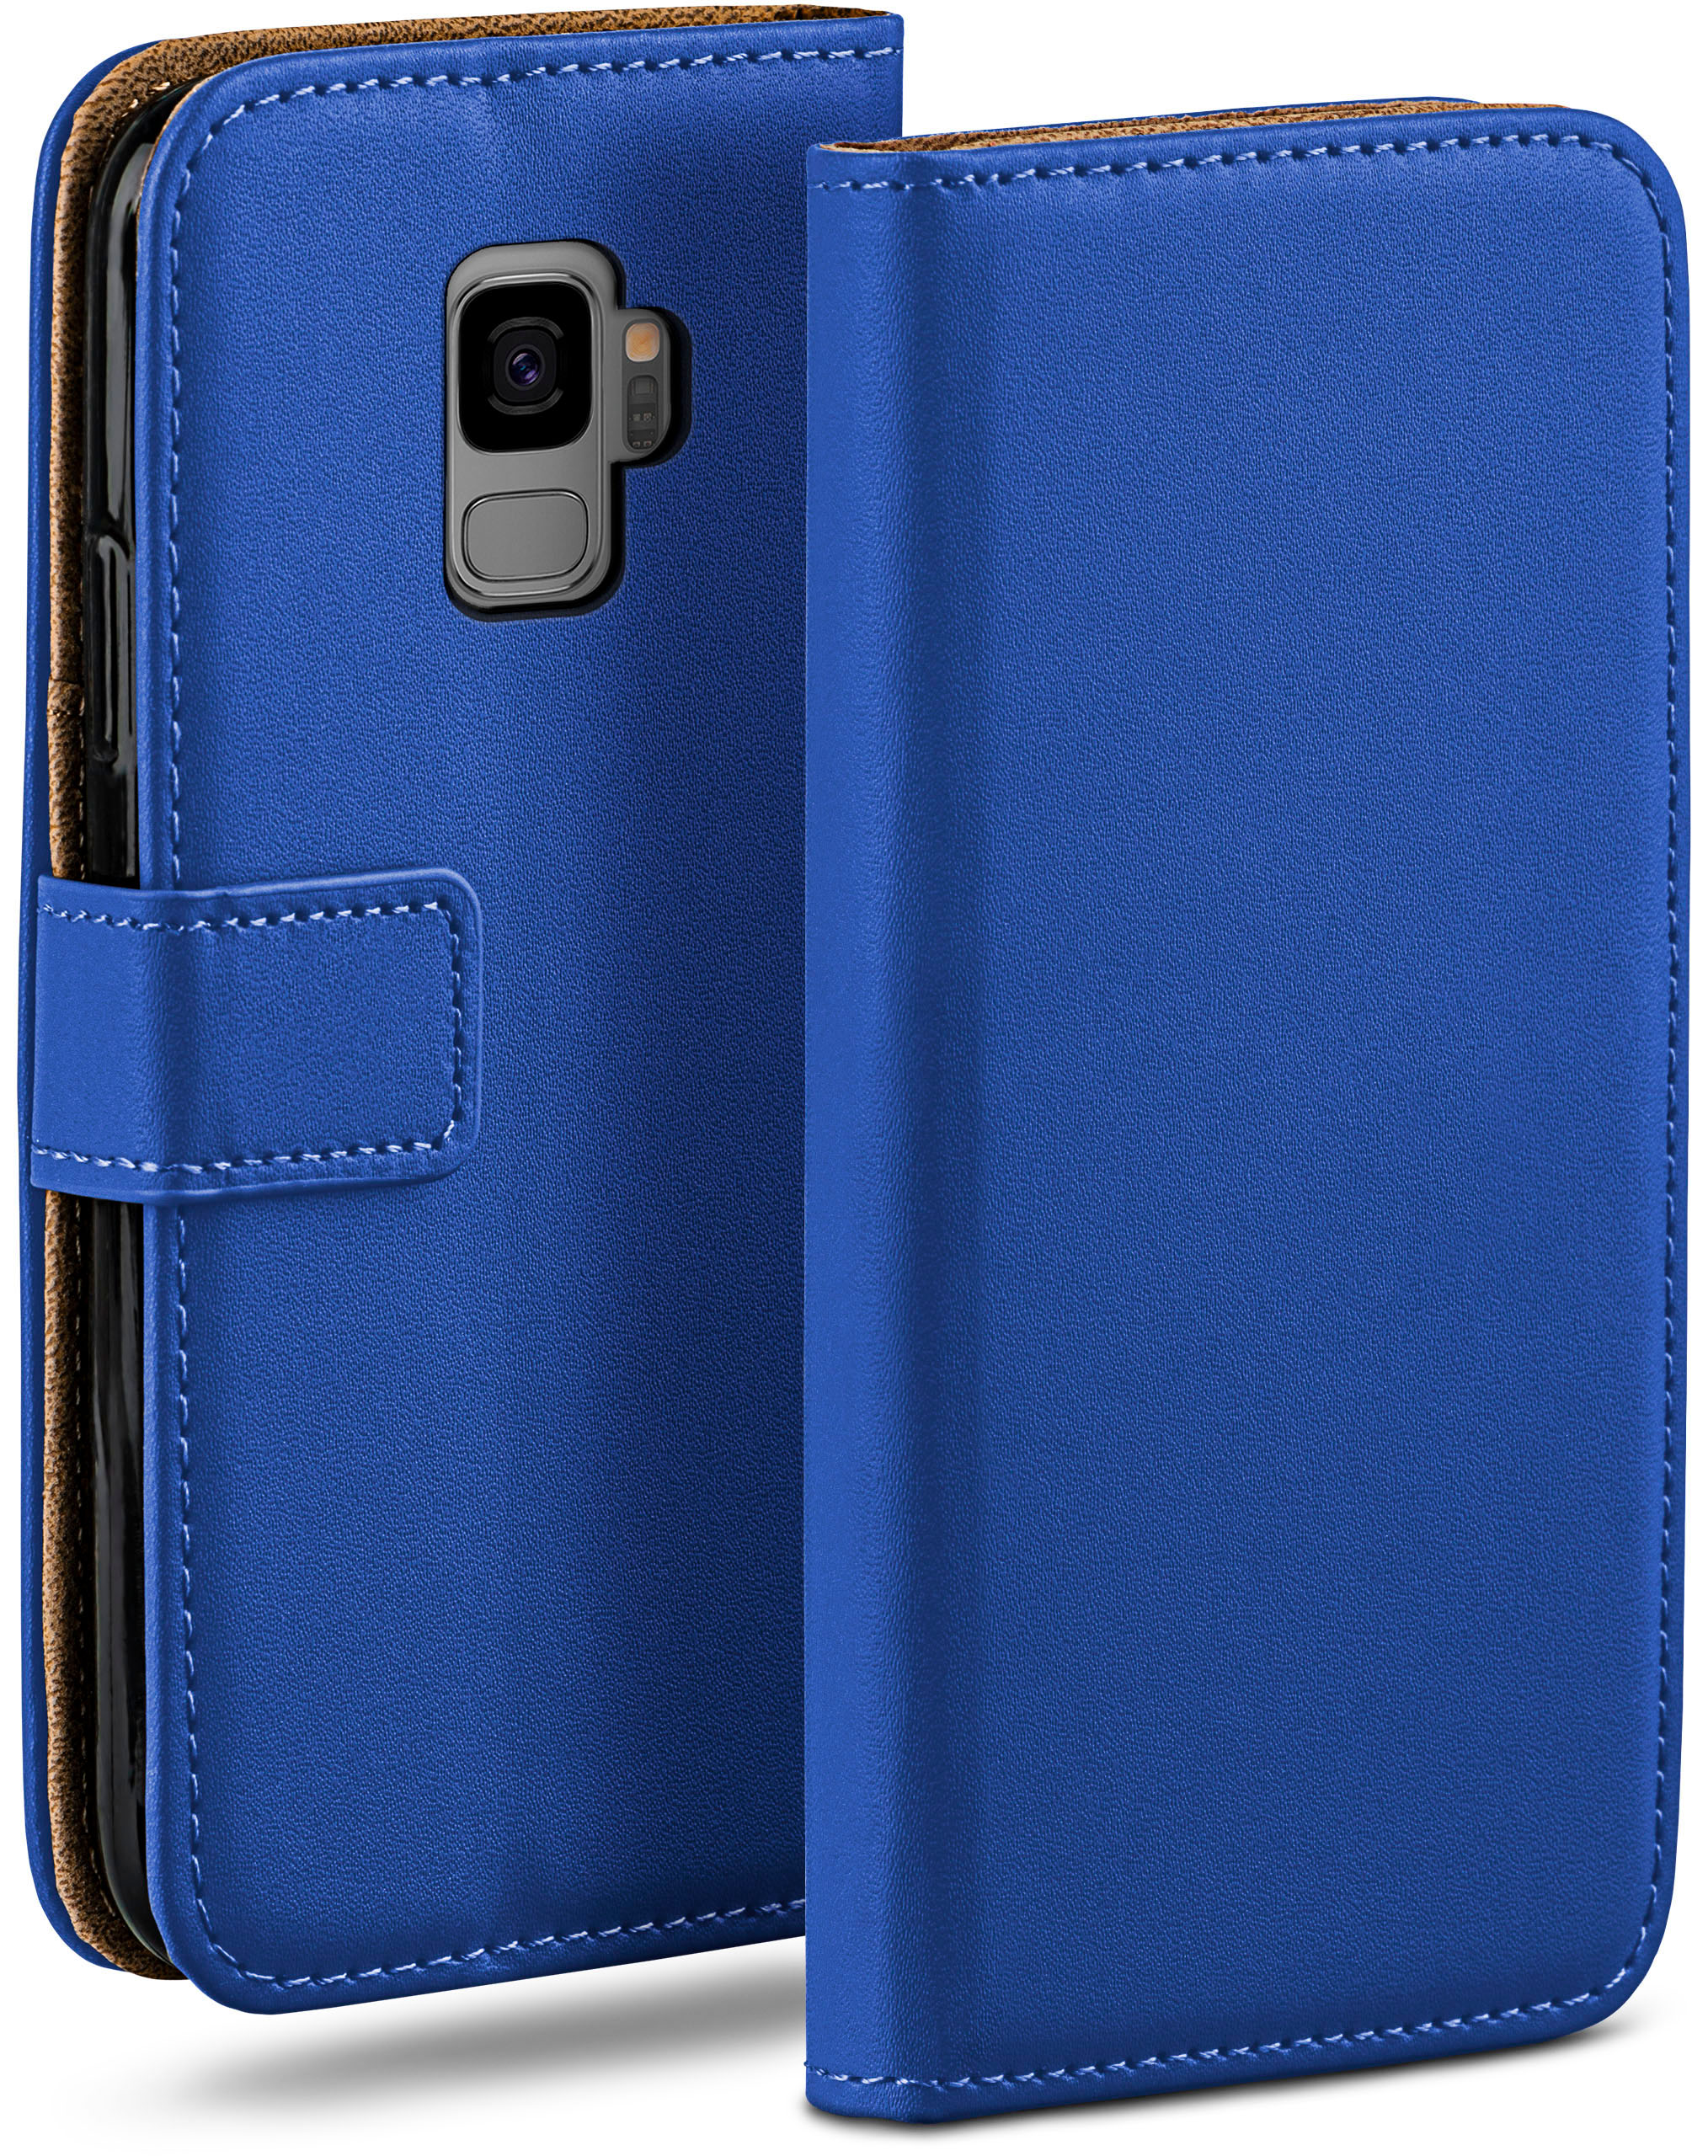 MOEX Book Samsung, Case, Galaxy Royal-Blue Bookcover, S9